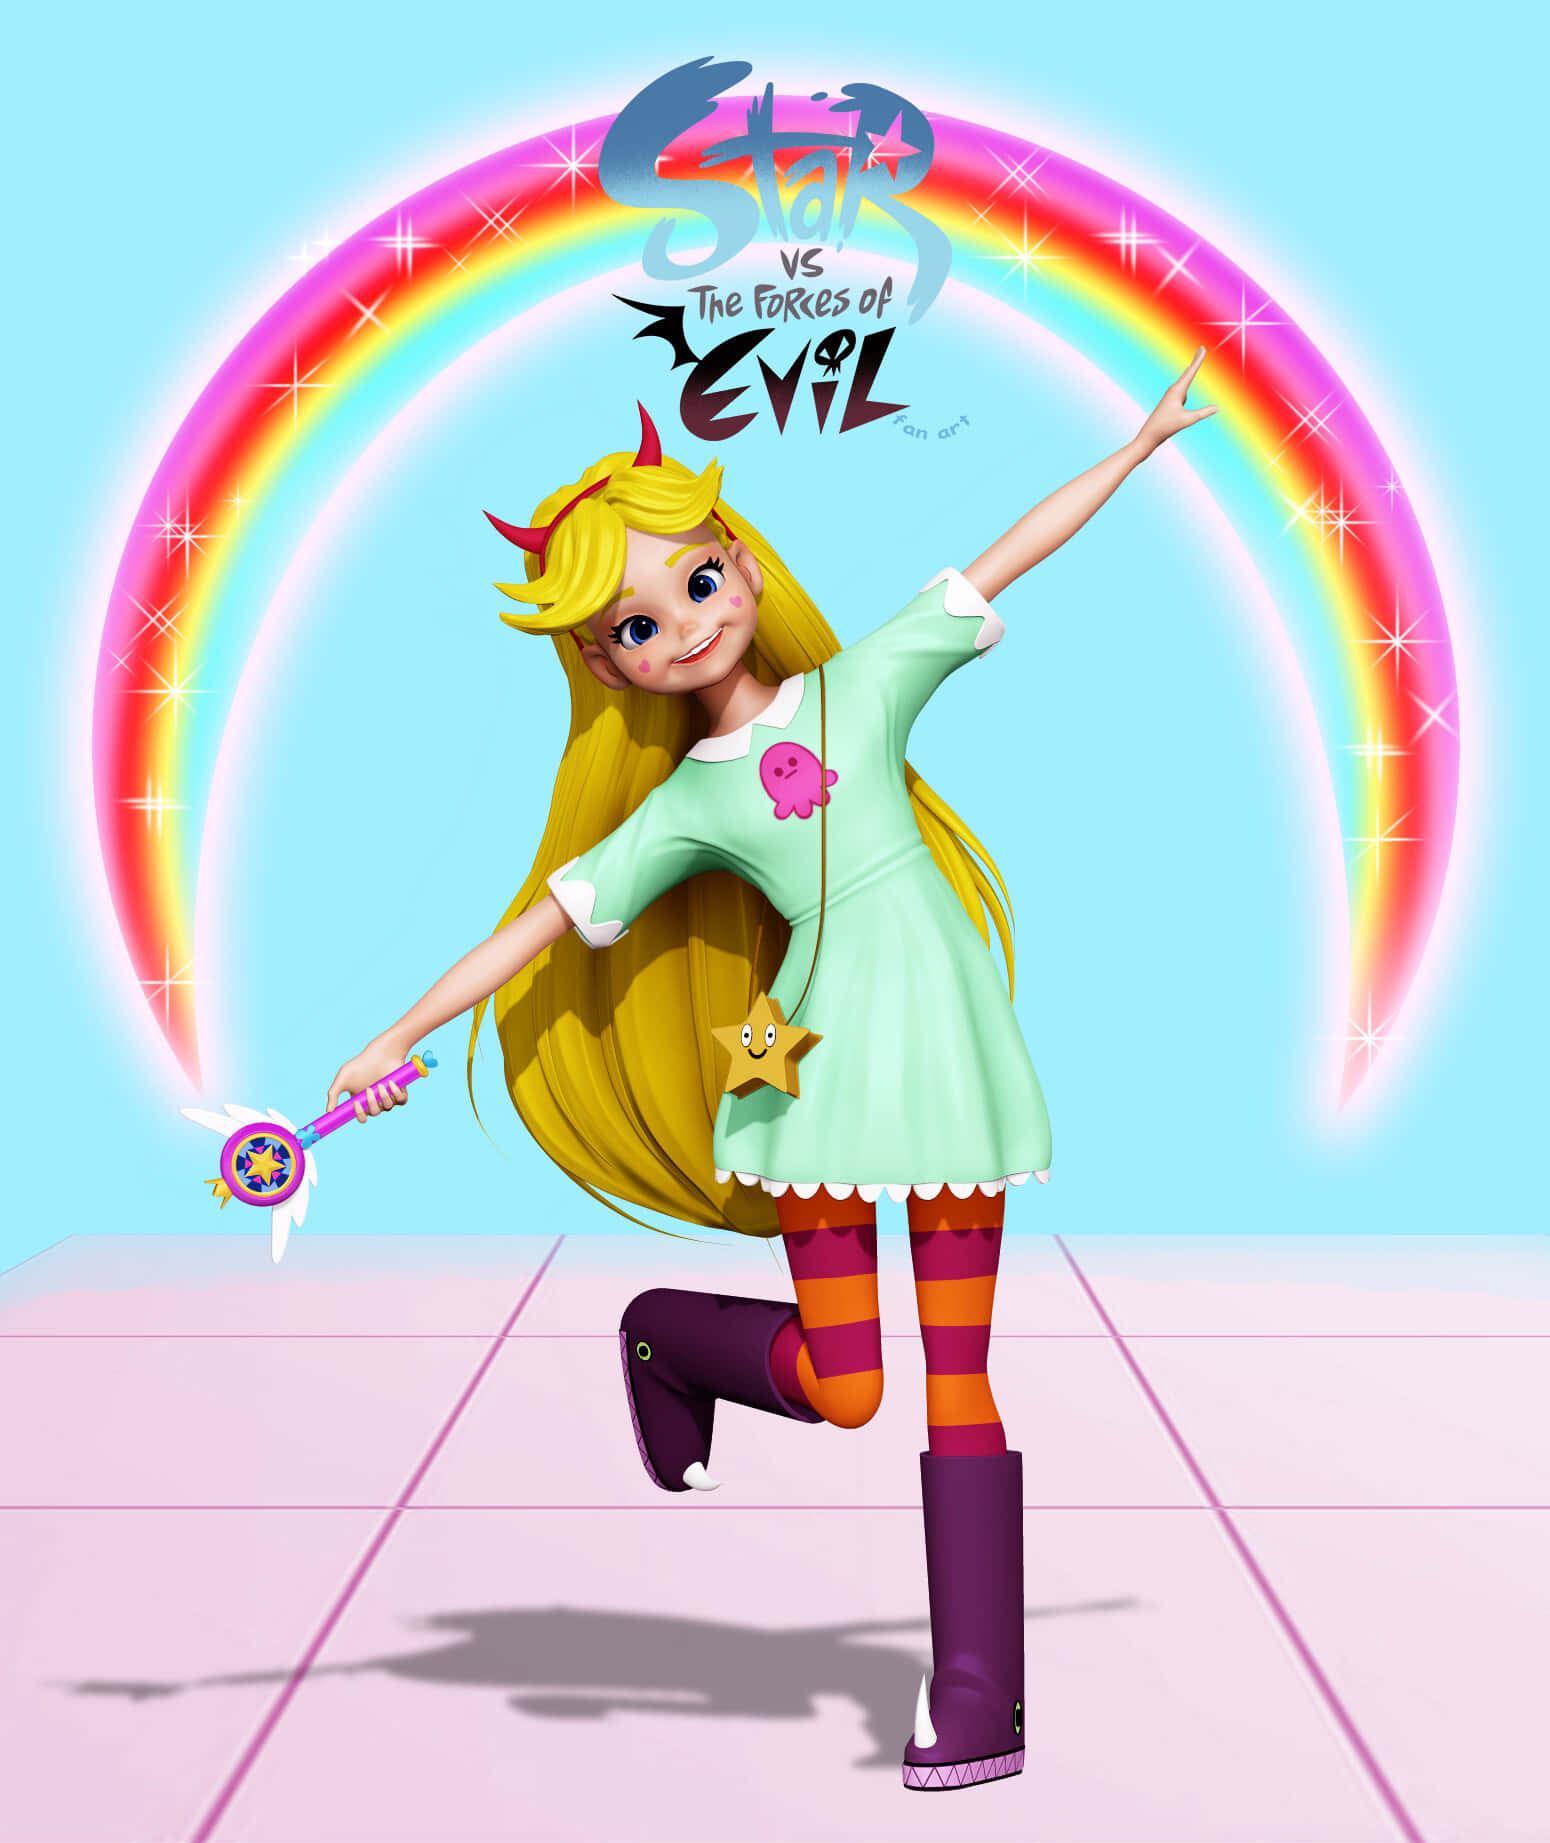 Star Butterfly from 'Star Vs The Forces Of Evil'